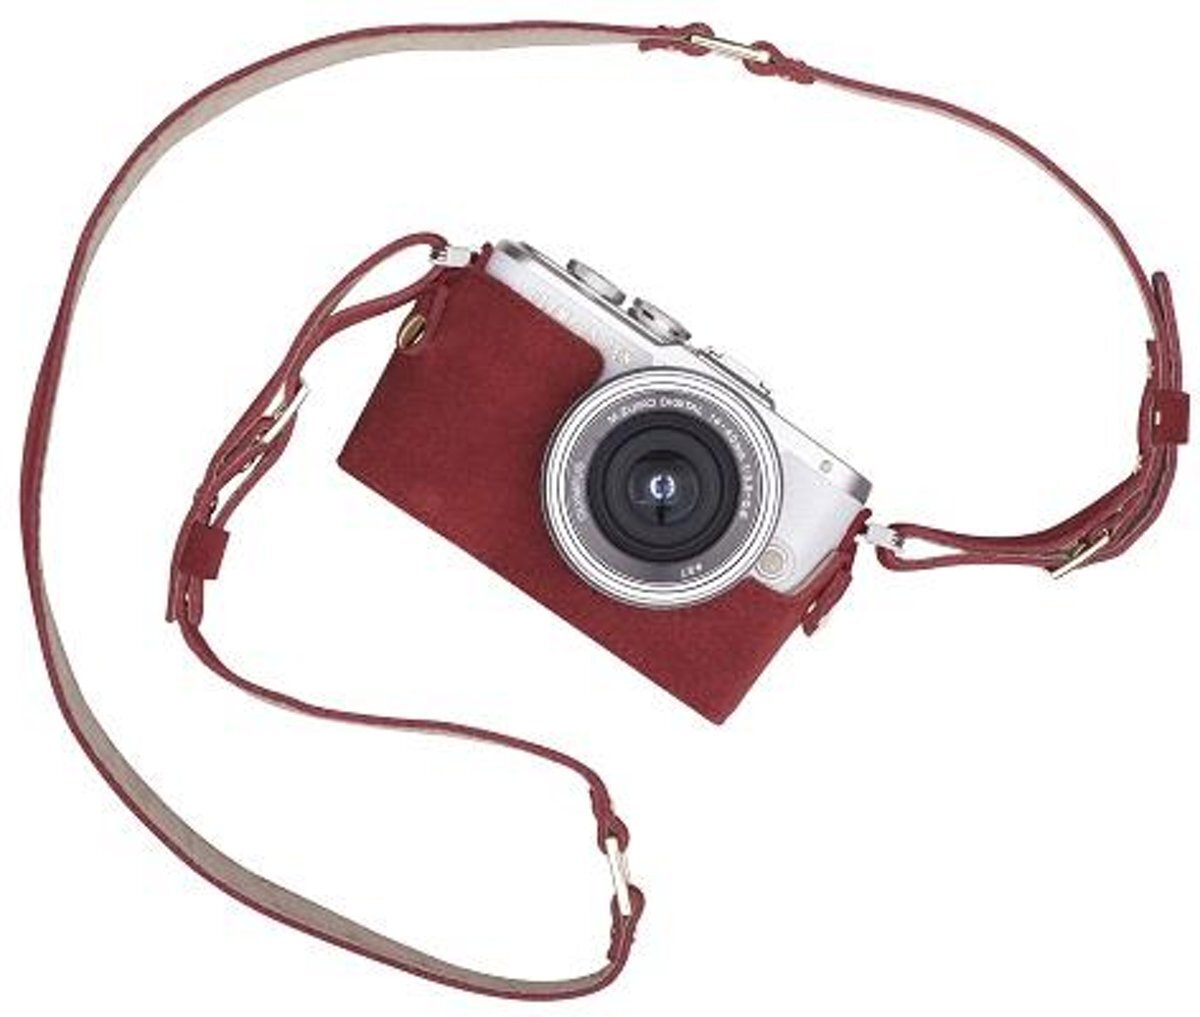 Olympus Camera Outfit Burgundy Temptations